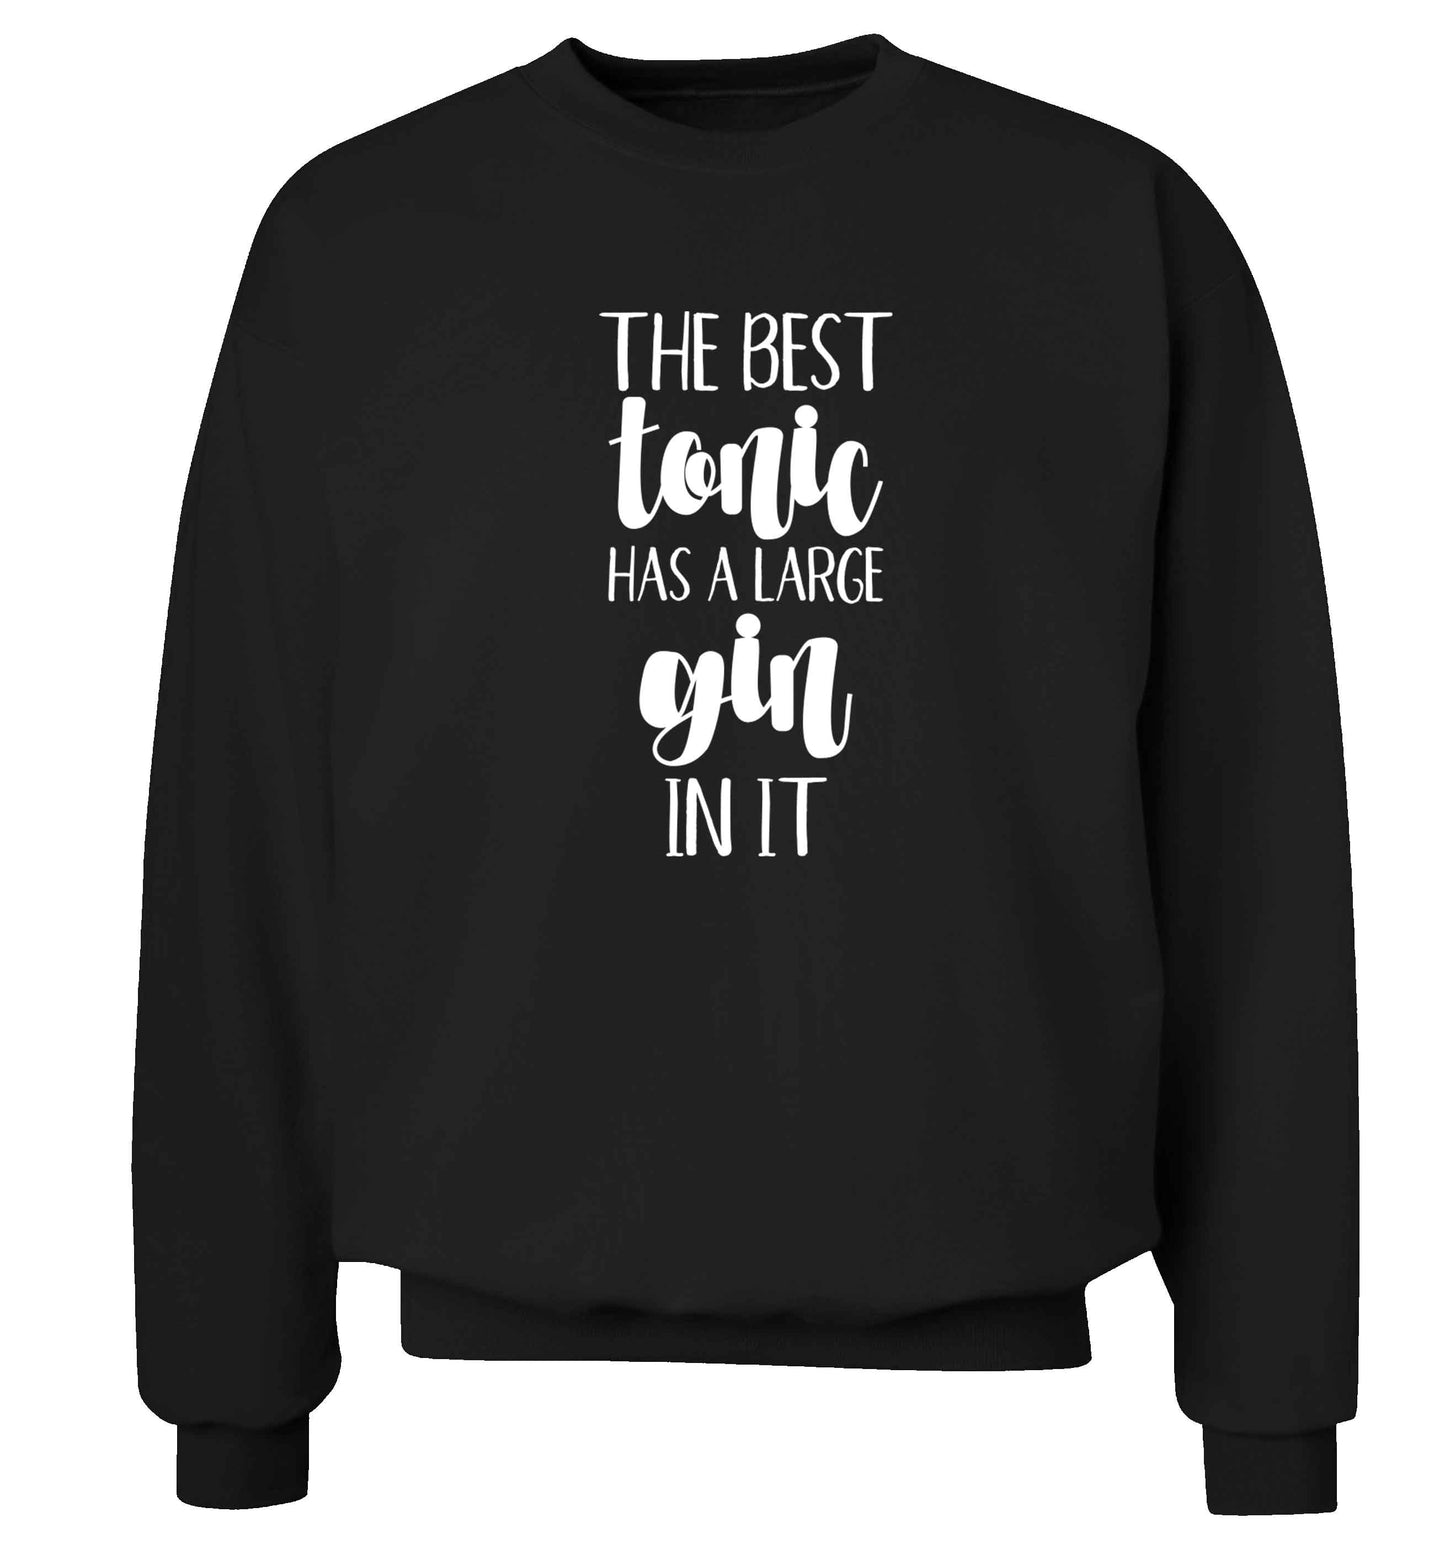 The best tonic has a large gin in it Adult's unisex black Sweater 2XL